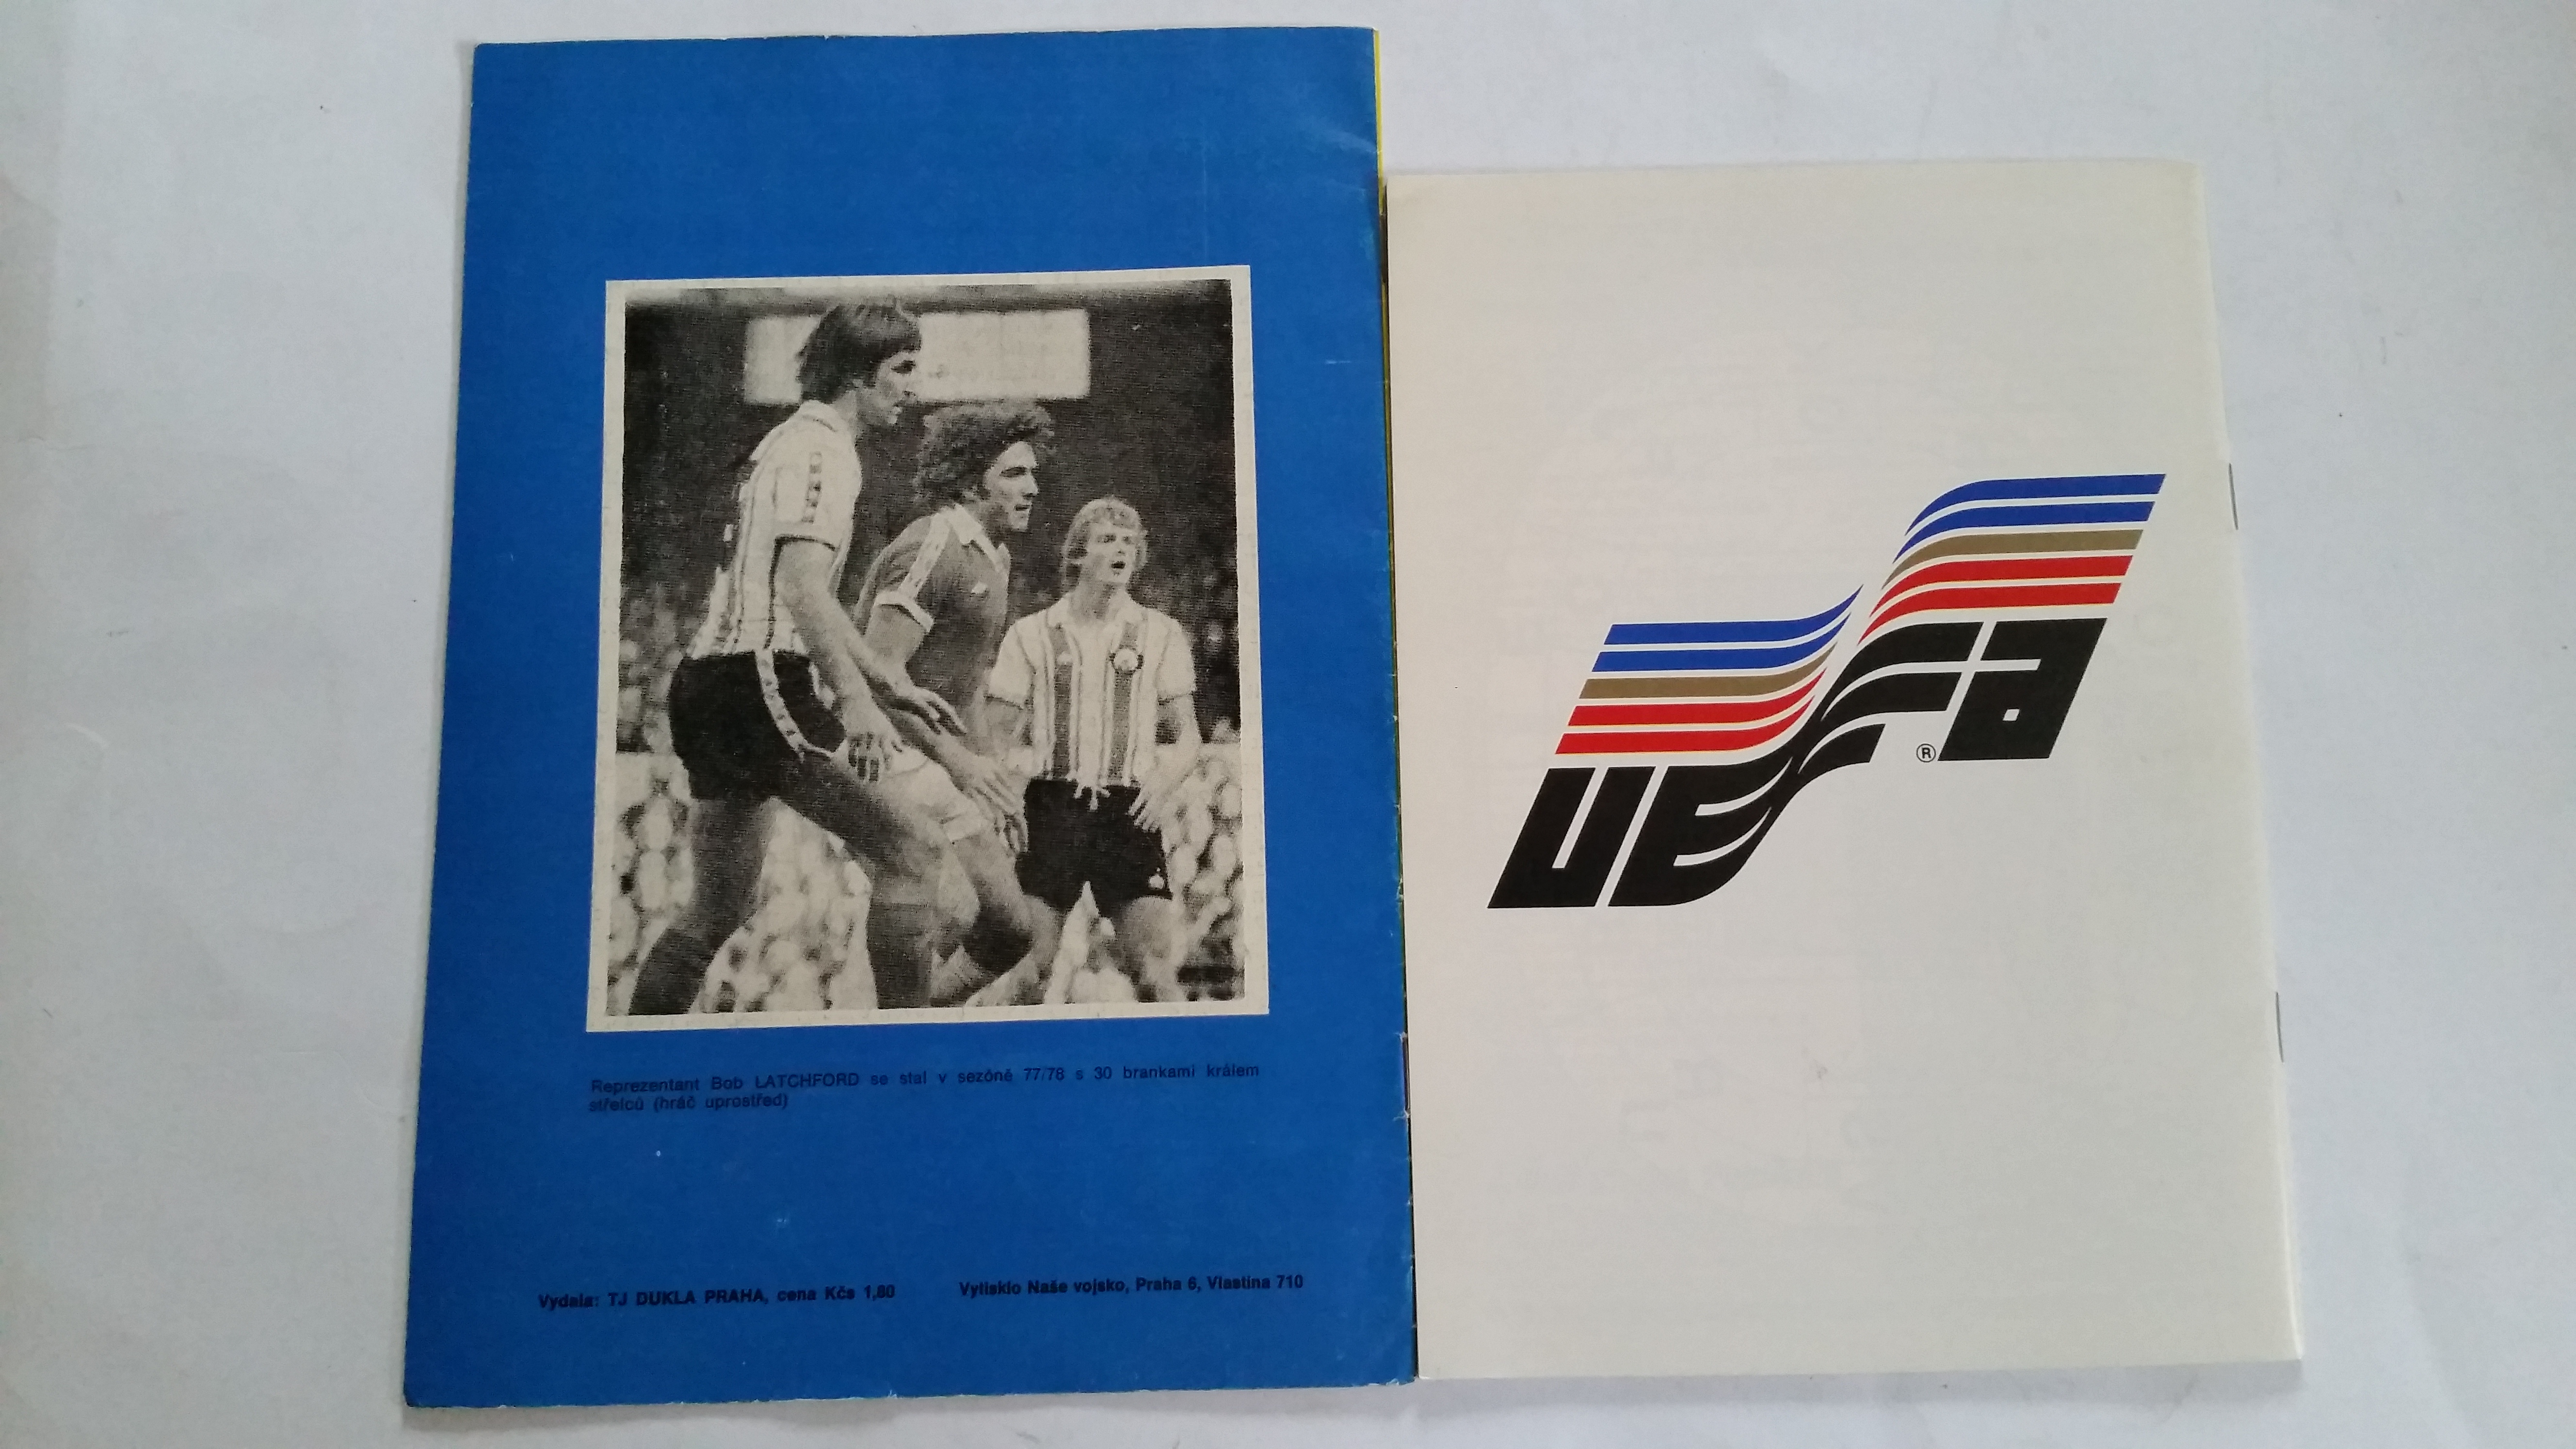 FOOTBALL, Everton in Europe programmes, inc. v Rapid Vienna 1985 in Europa Cup & Dukla Prague 1978/ - Image 2 of 2